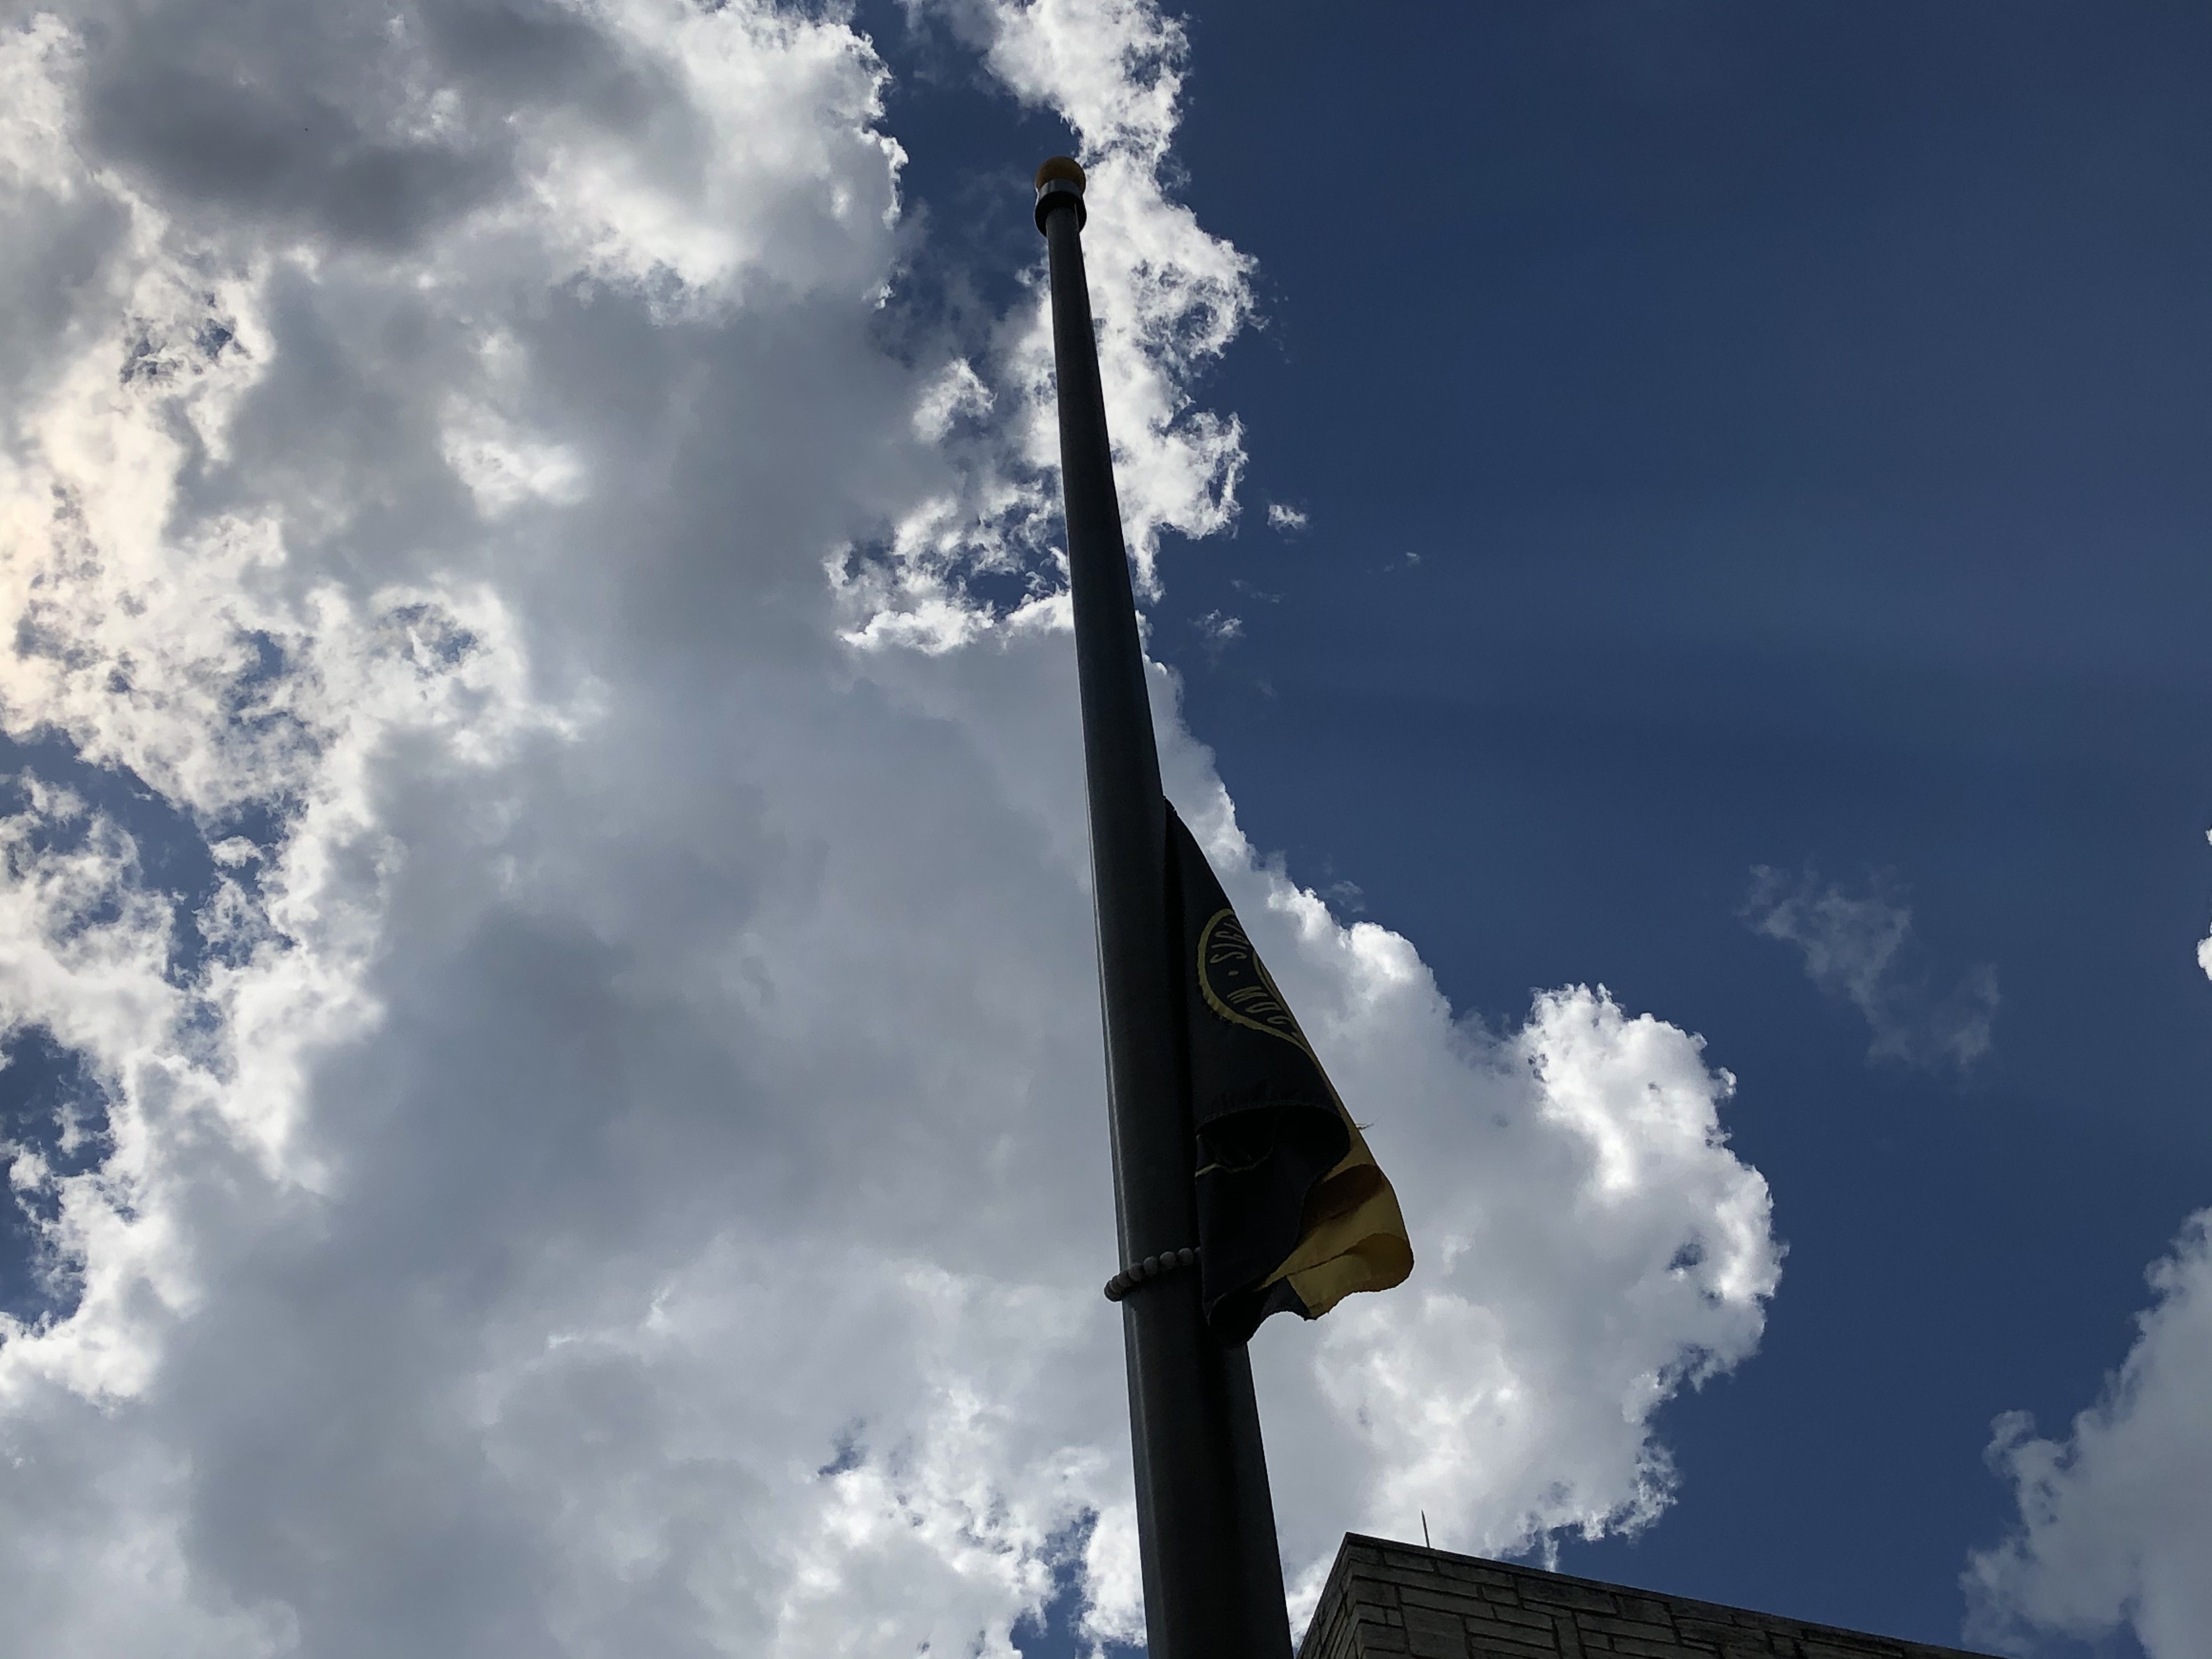 The Mizzou flat was lowered on May 26 at the Student Center in memory of Dakota.